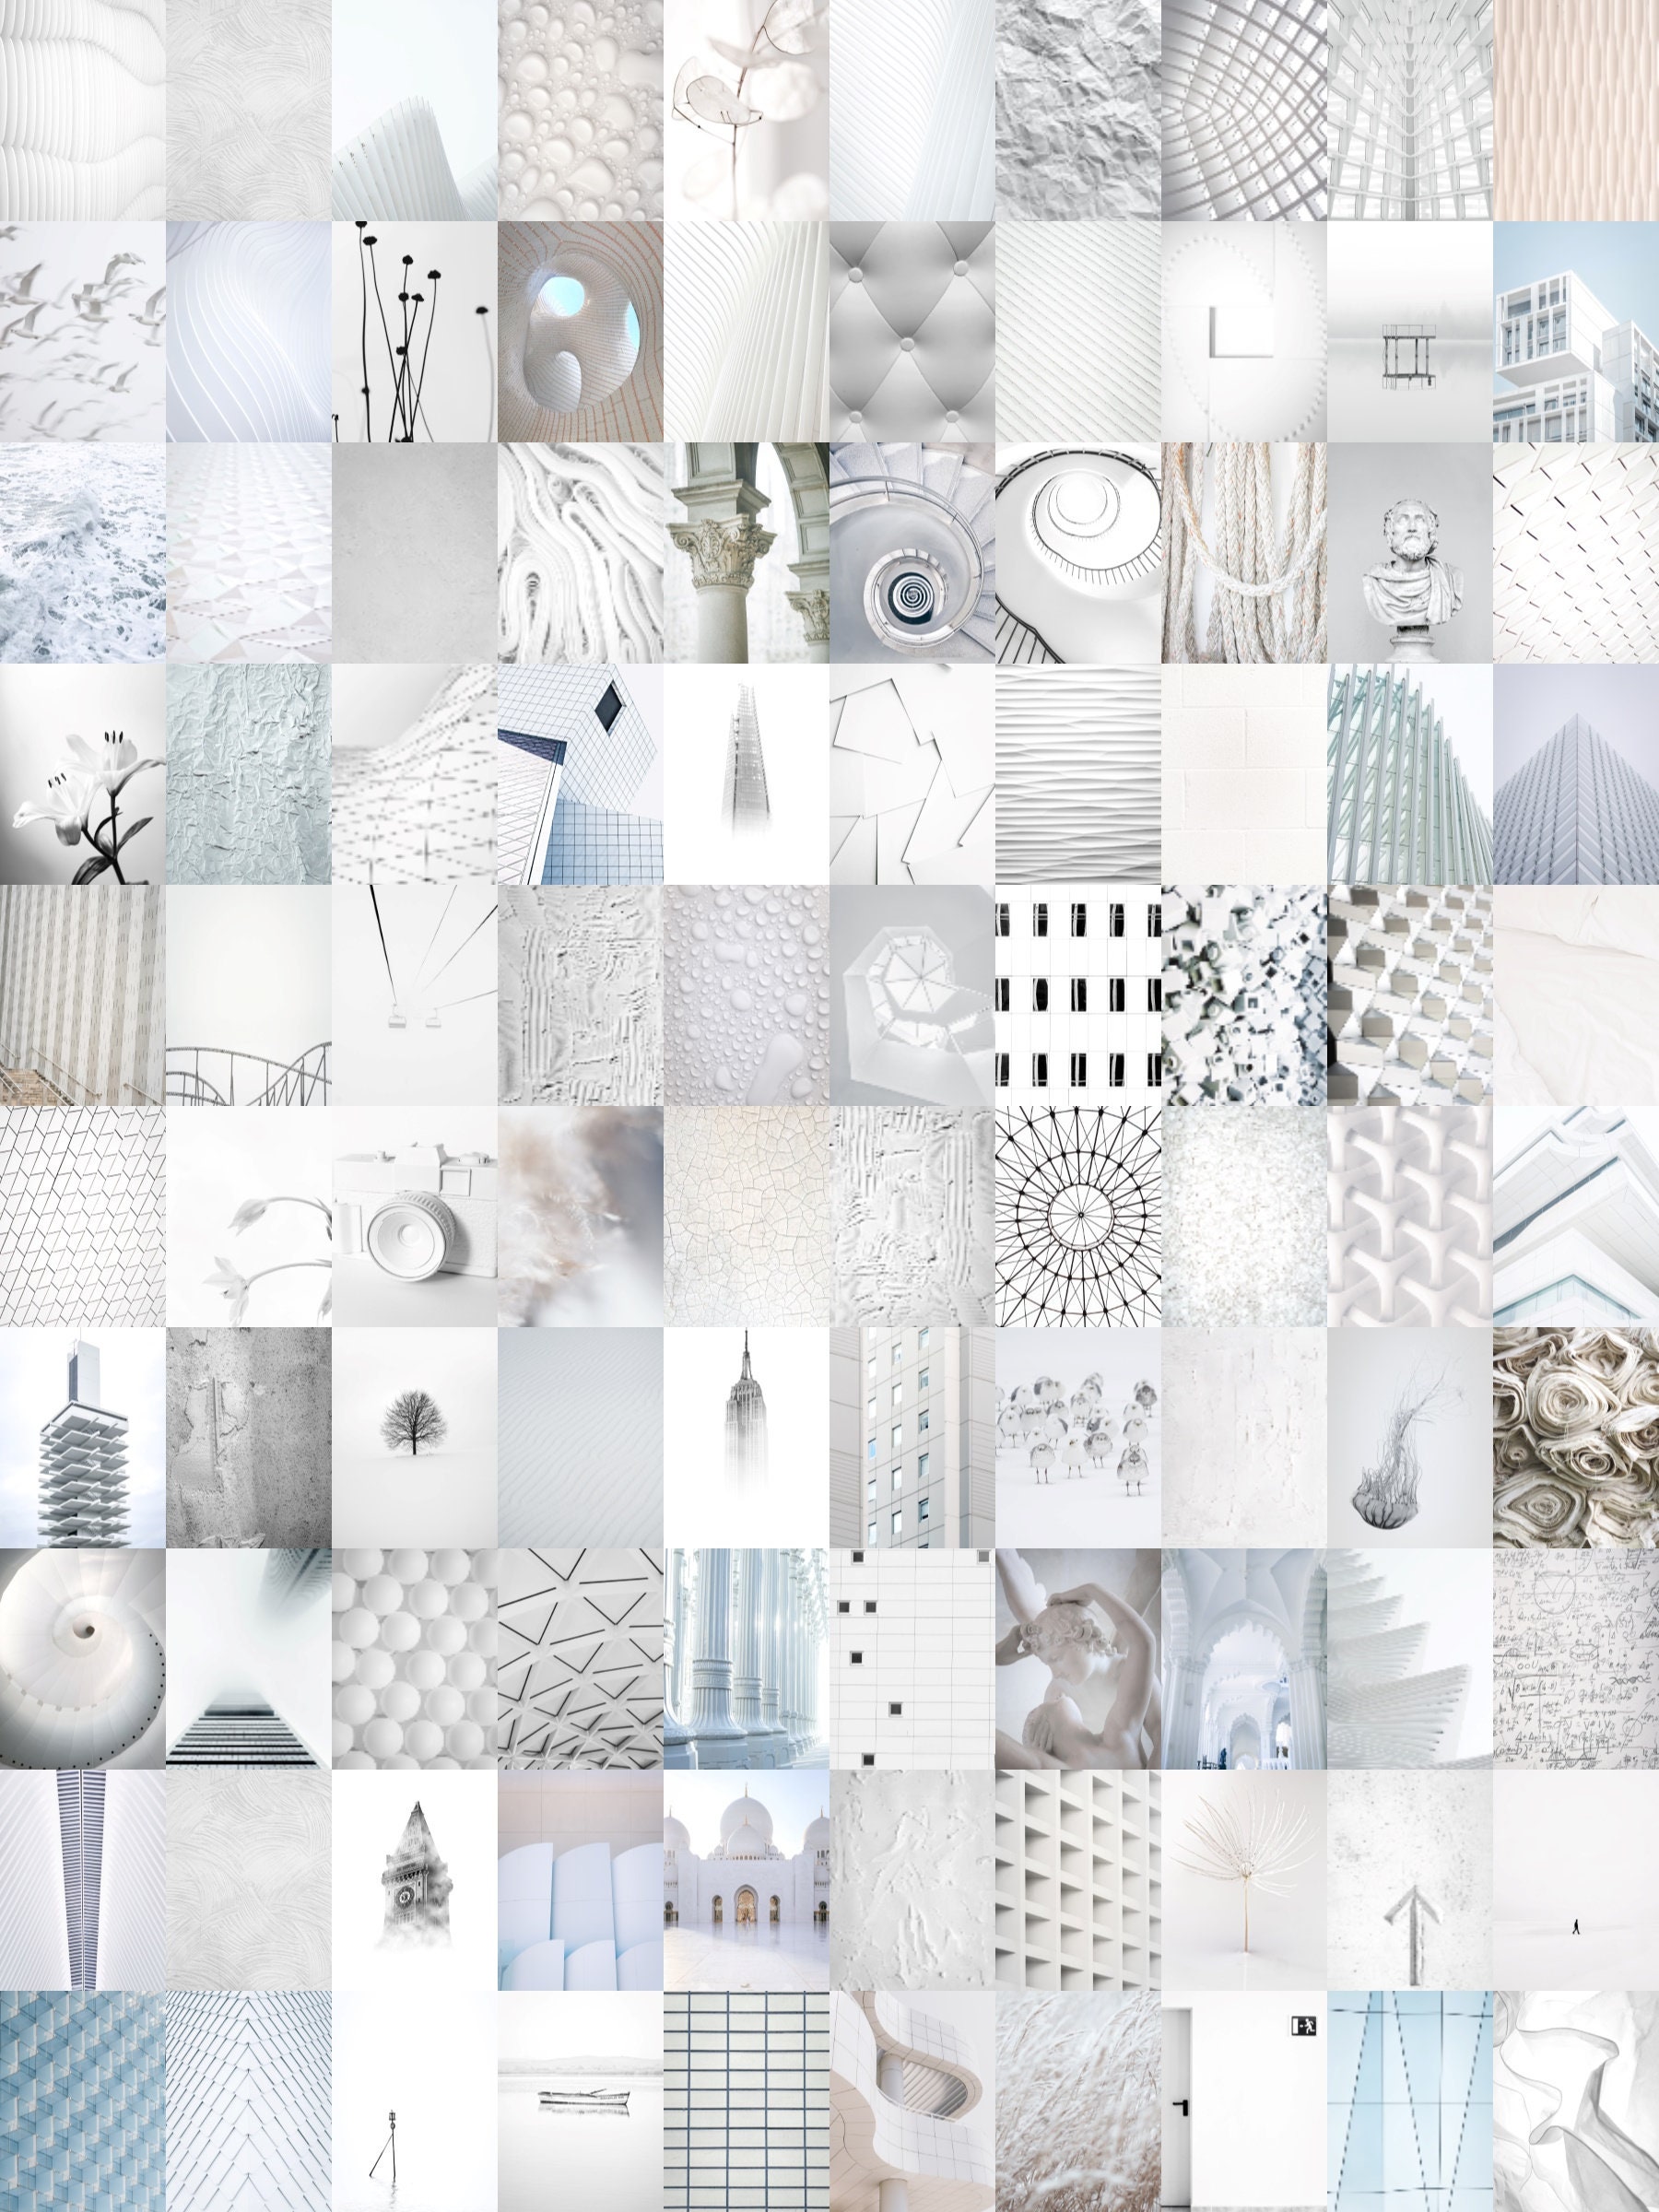 White Aesthetic Wall Collage Kit Digital Download Photo | Etsy